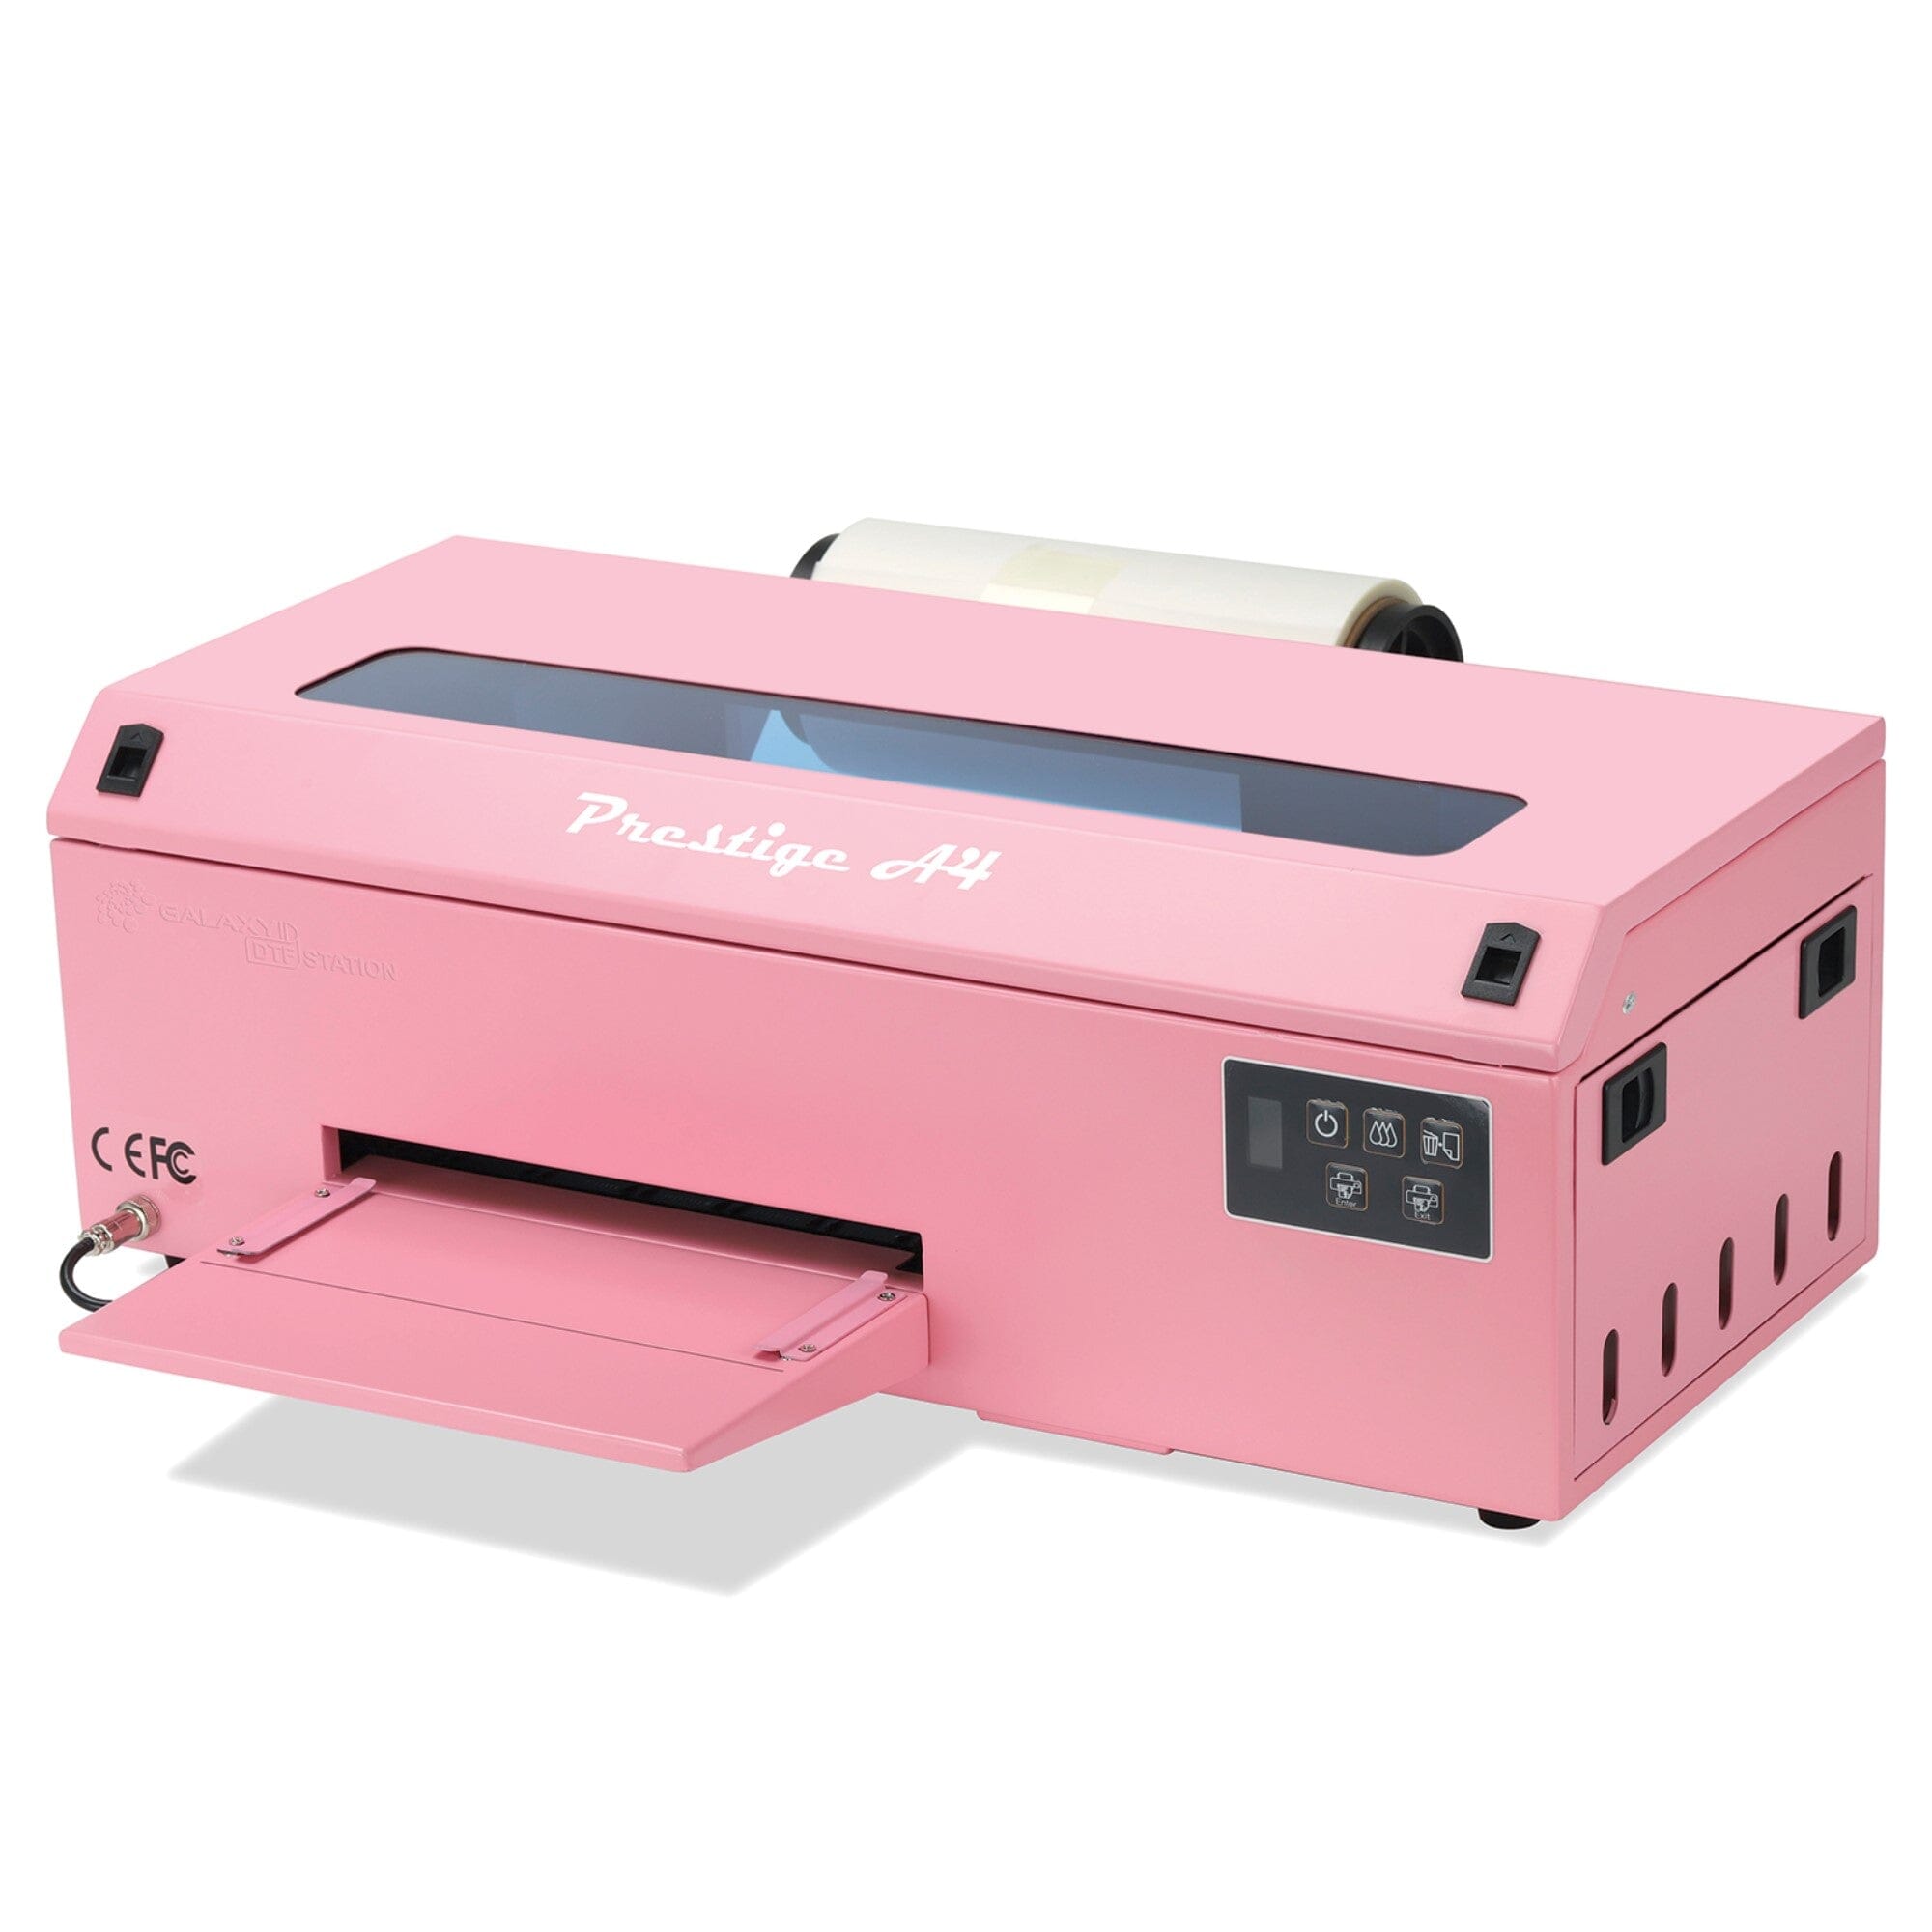 Prestige A4 Direct to Film (DTF) Roll Printer w/ Inks, Supplies - Pink